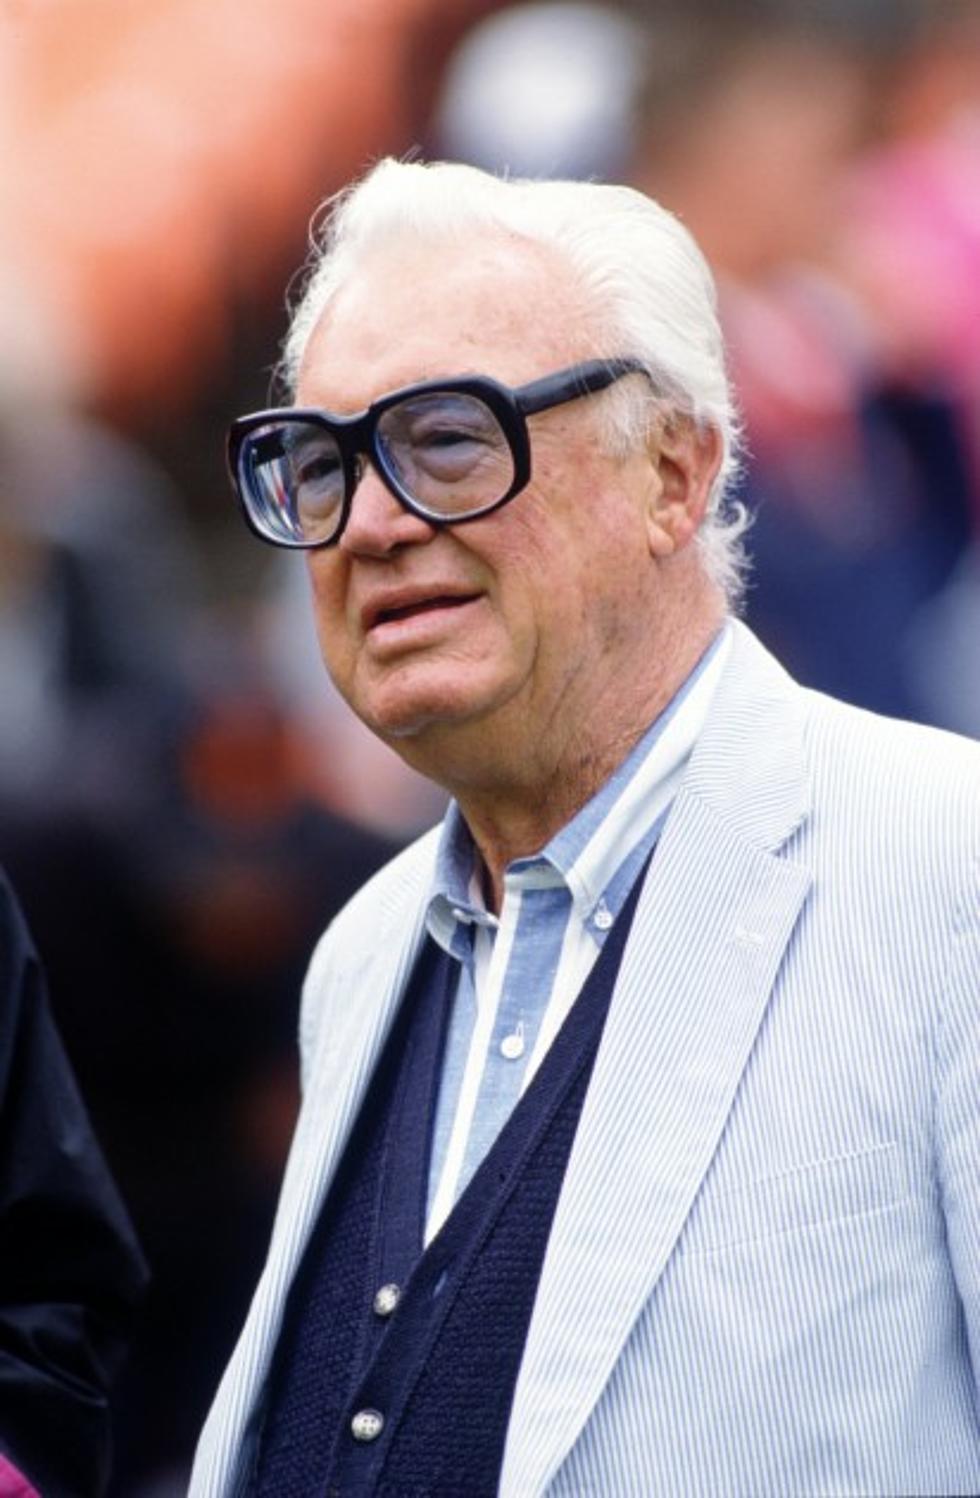 How Many Beers Did Harry Caray Drink in His Lifetime?